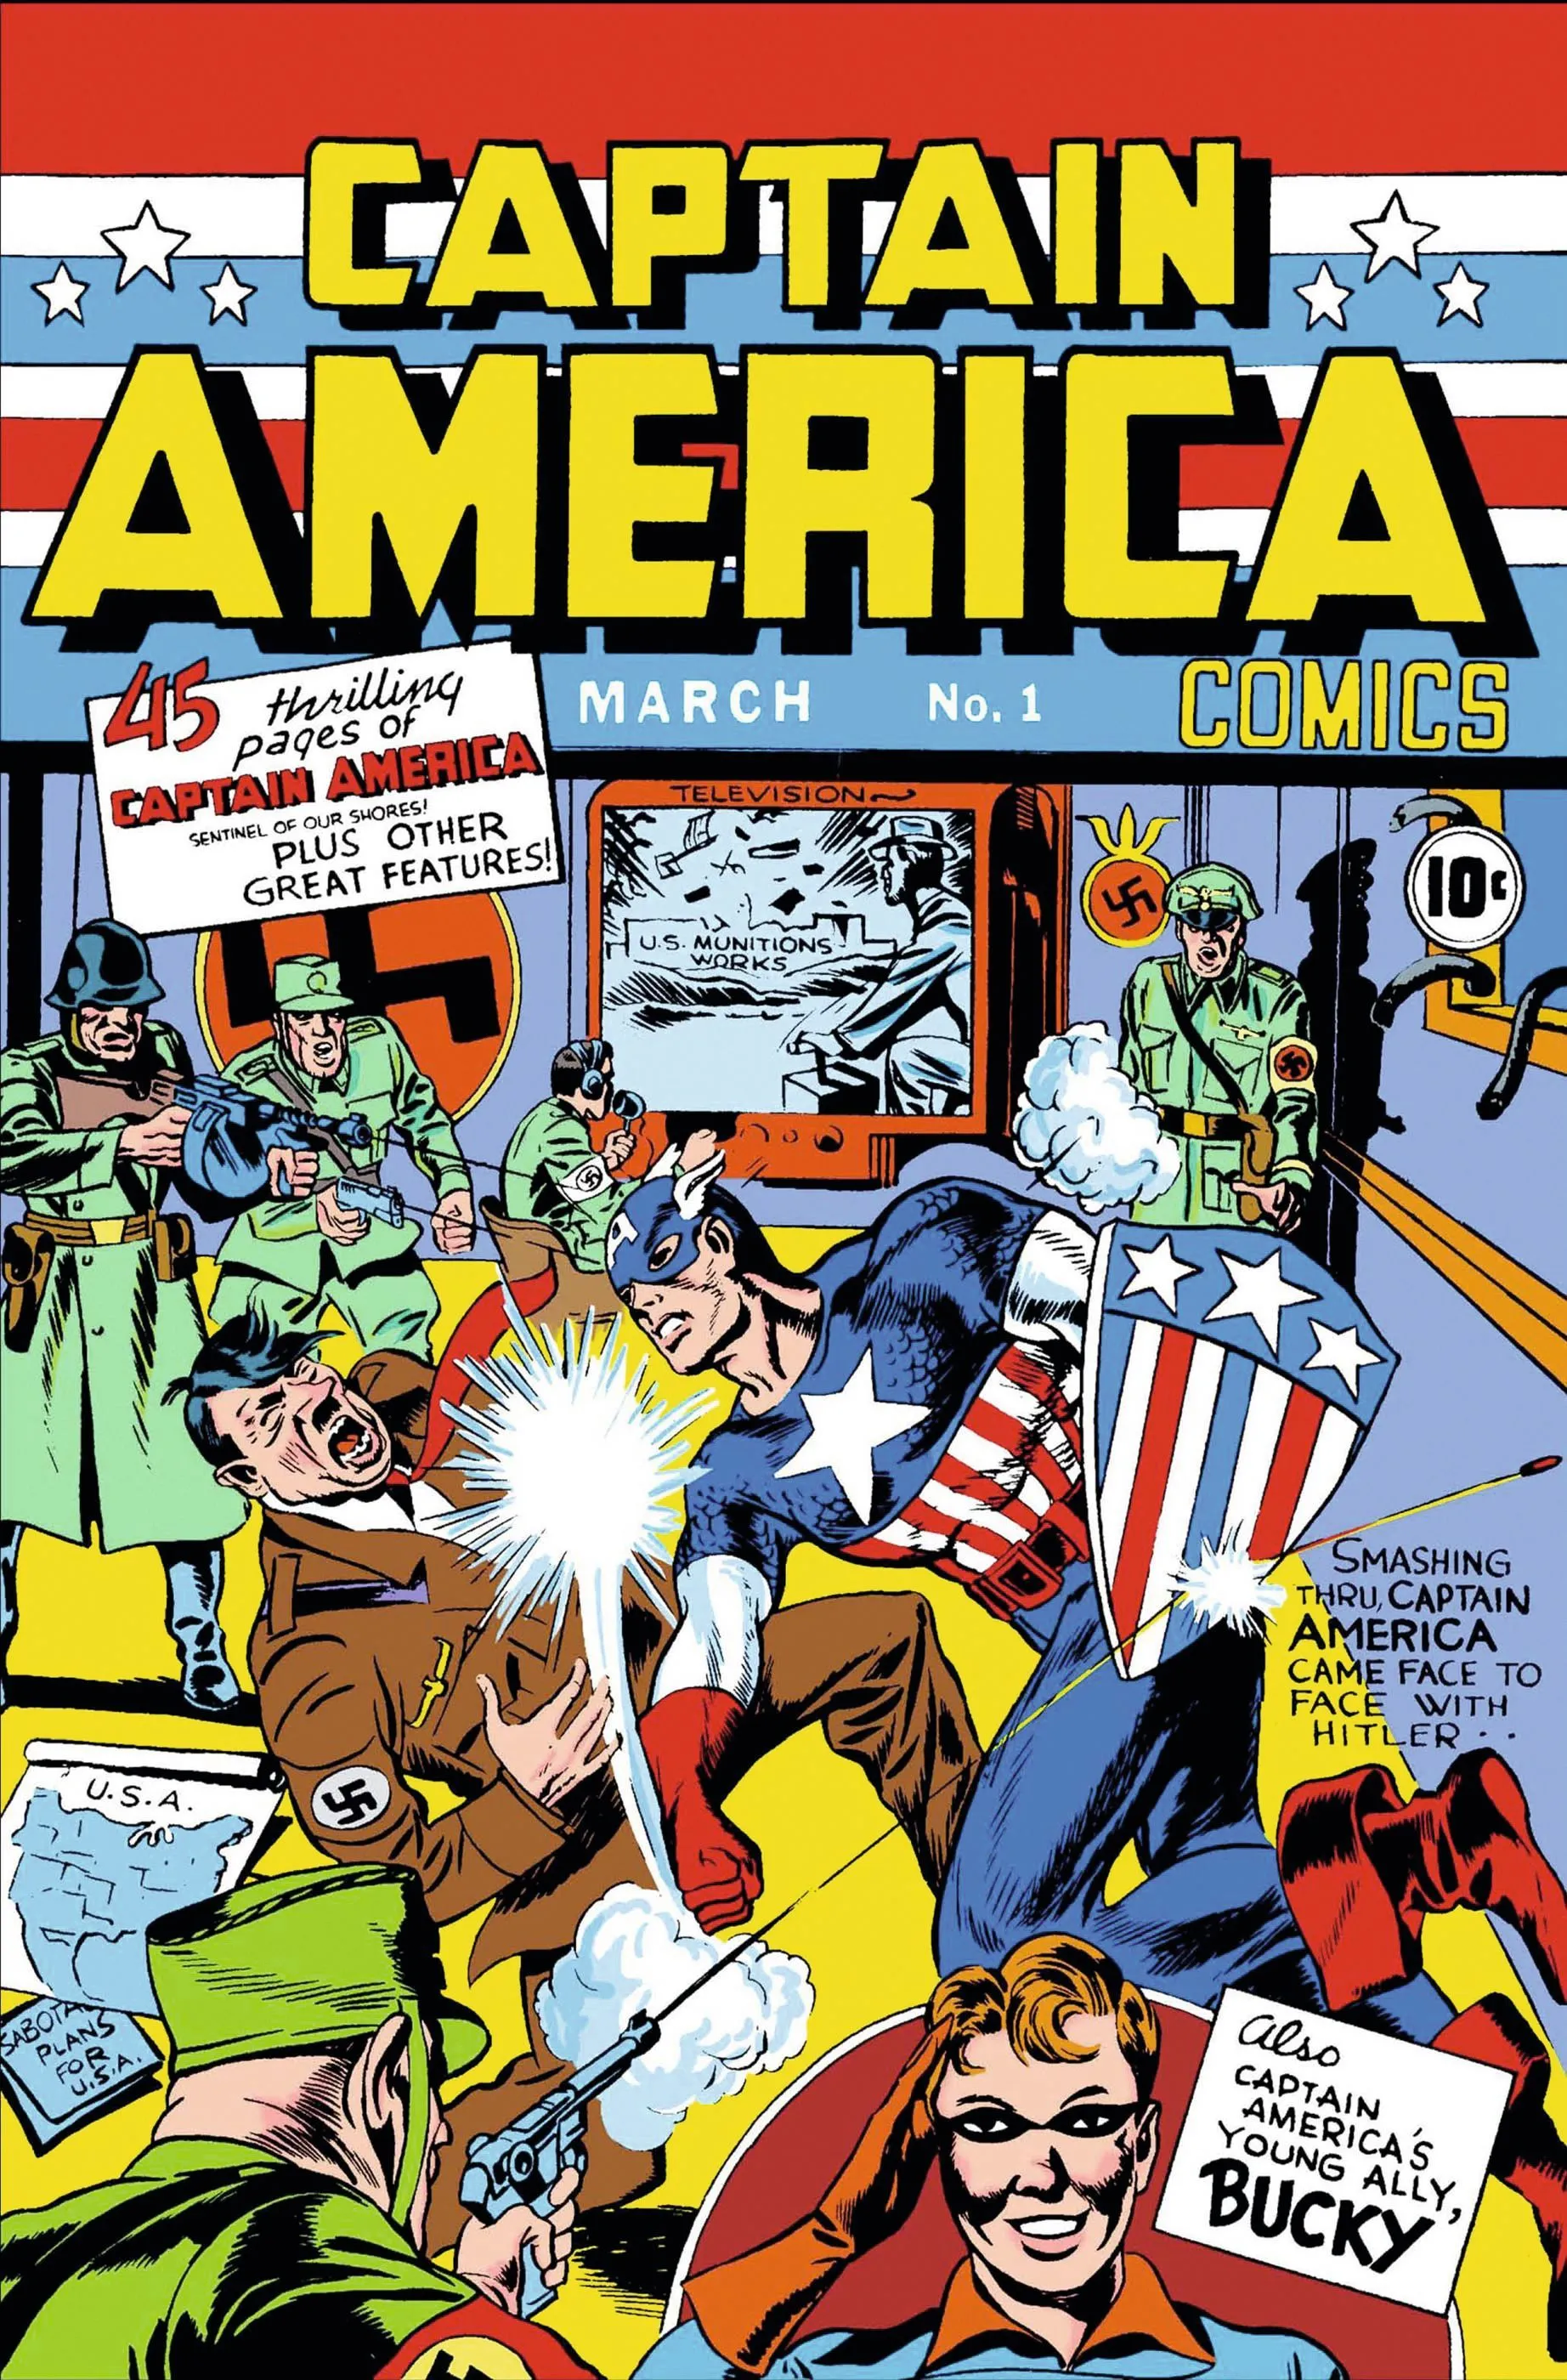 Cover of Captain America #1 Timely Comics, 1941